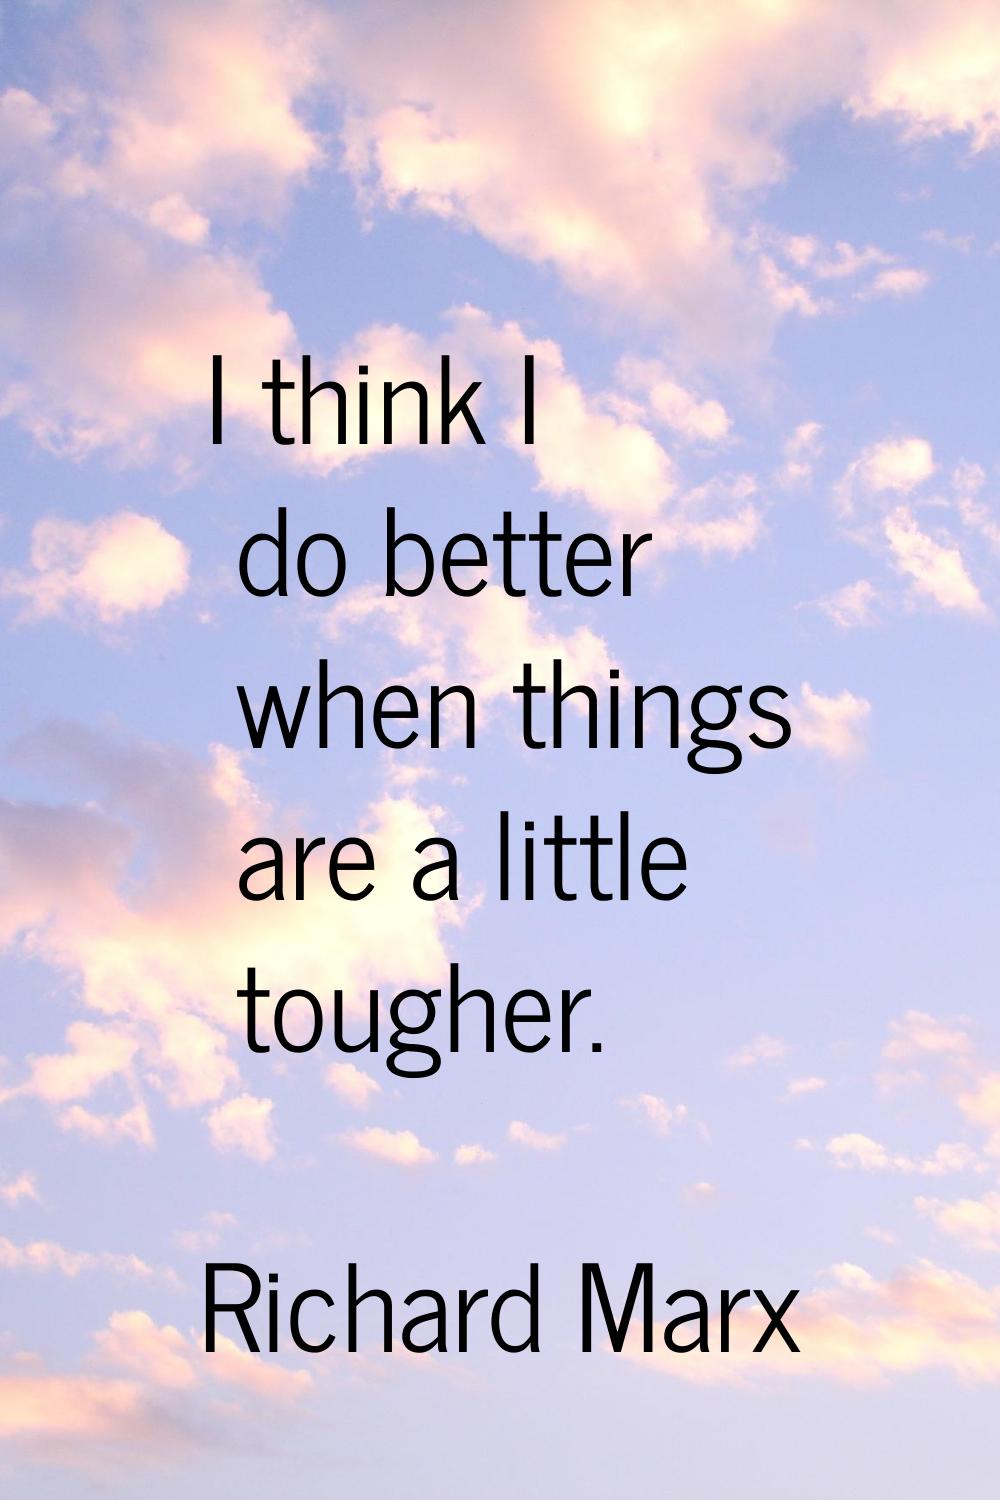 I think I do better when things are a little tougher.